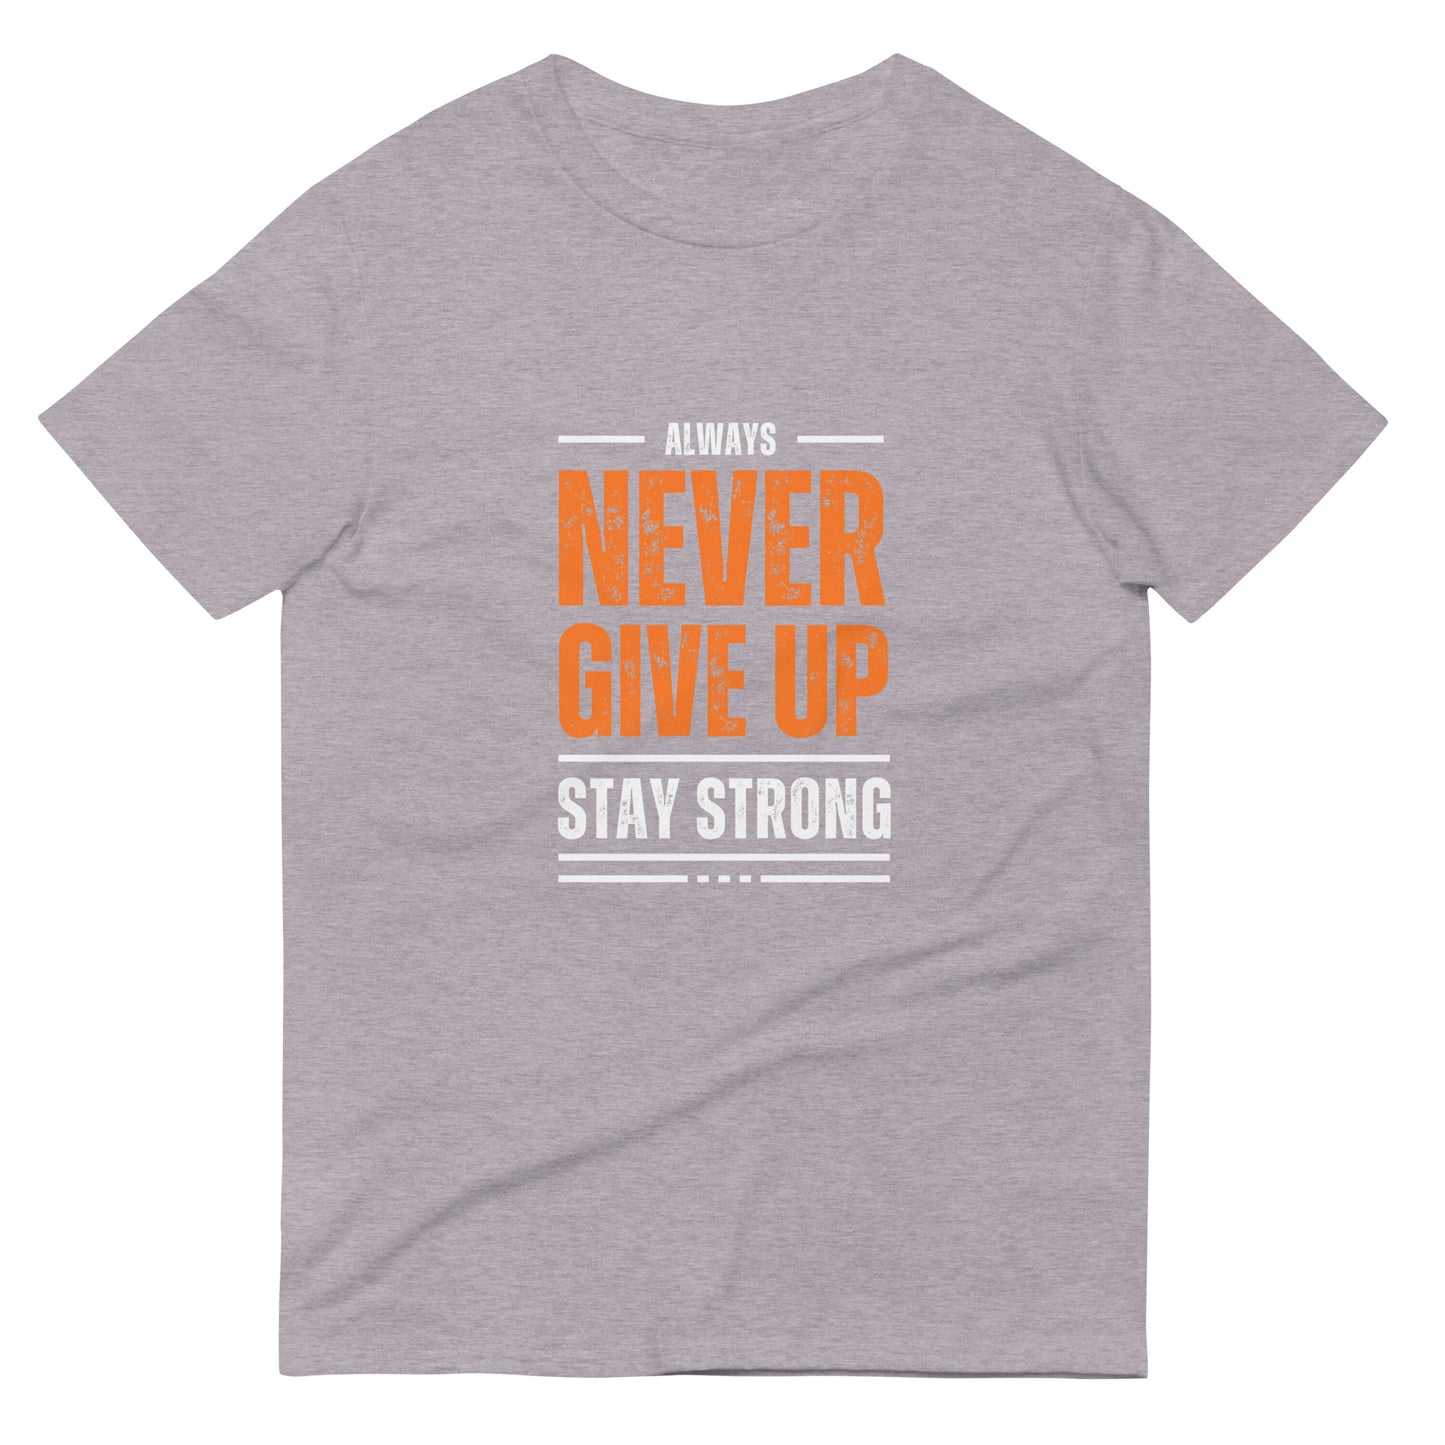 Never Give Up Stay Strong T-Shirt